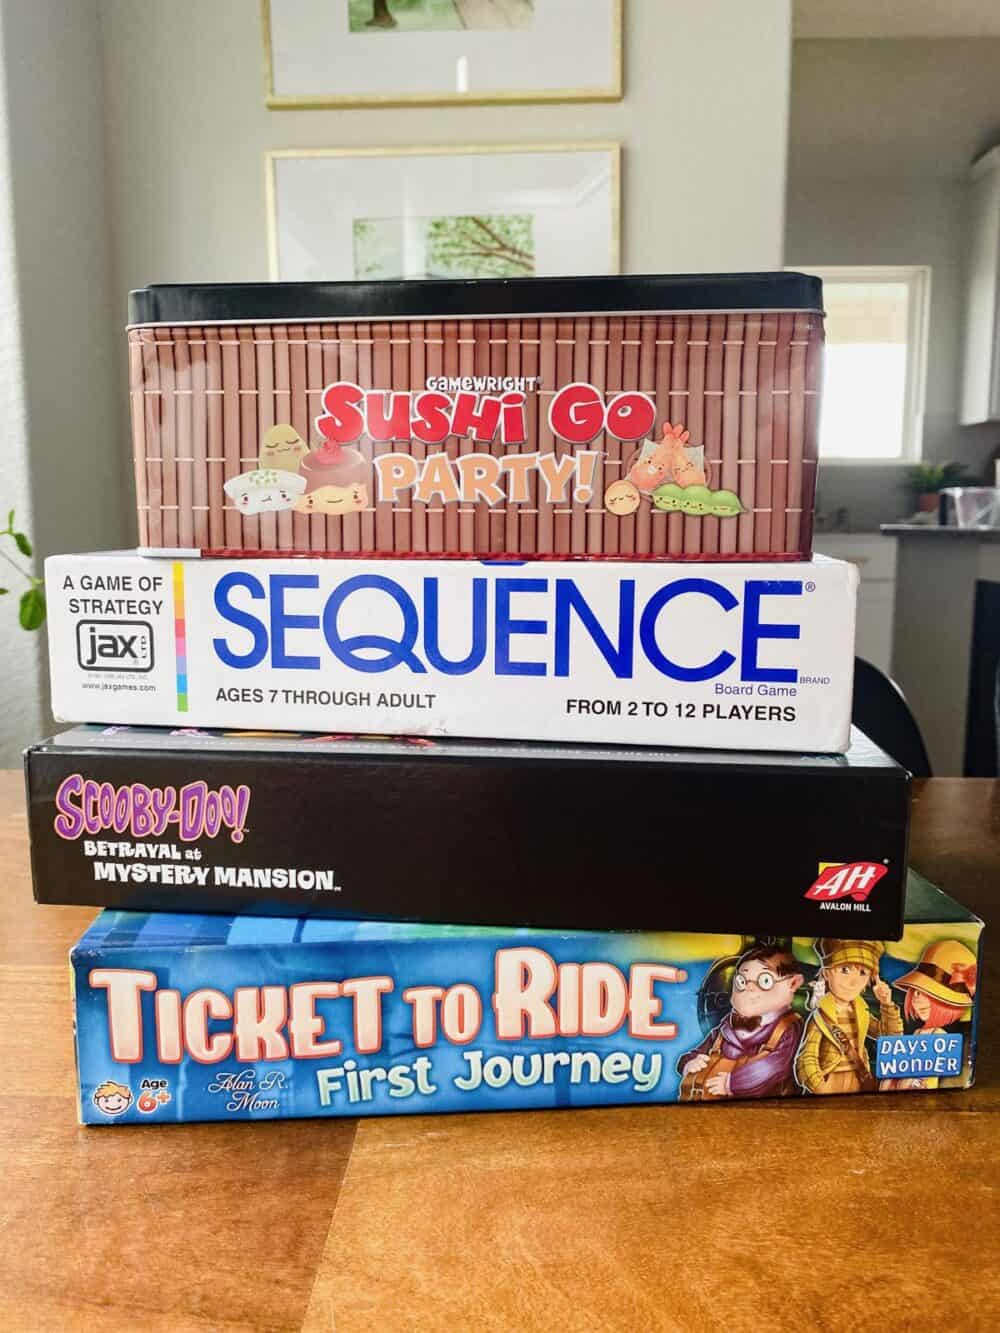 Stack of board games for kids, including Ticket to Ride First Journey, Betrayal at Mystery Mansion, Sequence, and Sushi Go